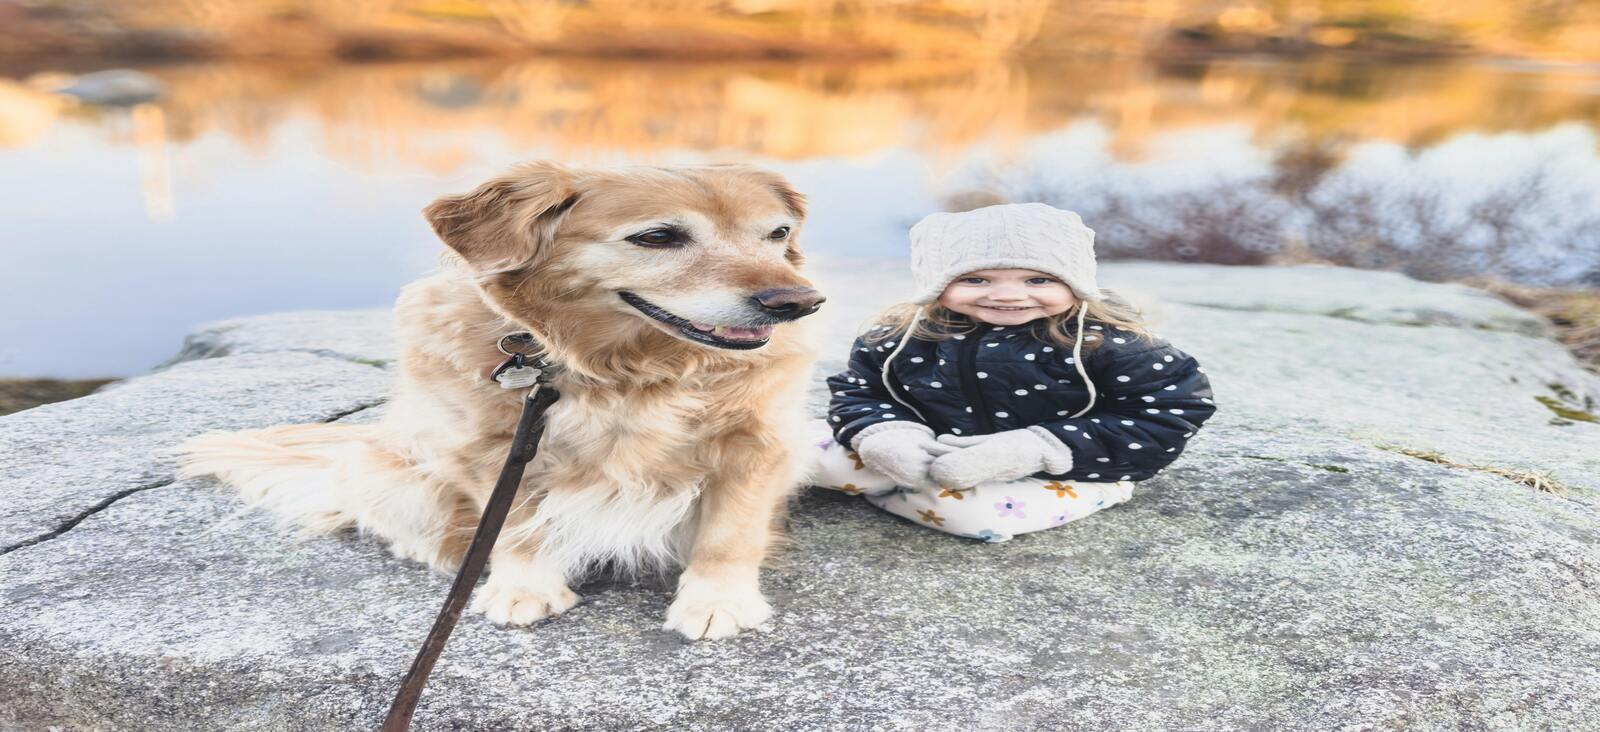 What Should I Do if a Dog Bites My Child